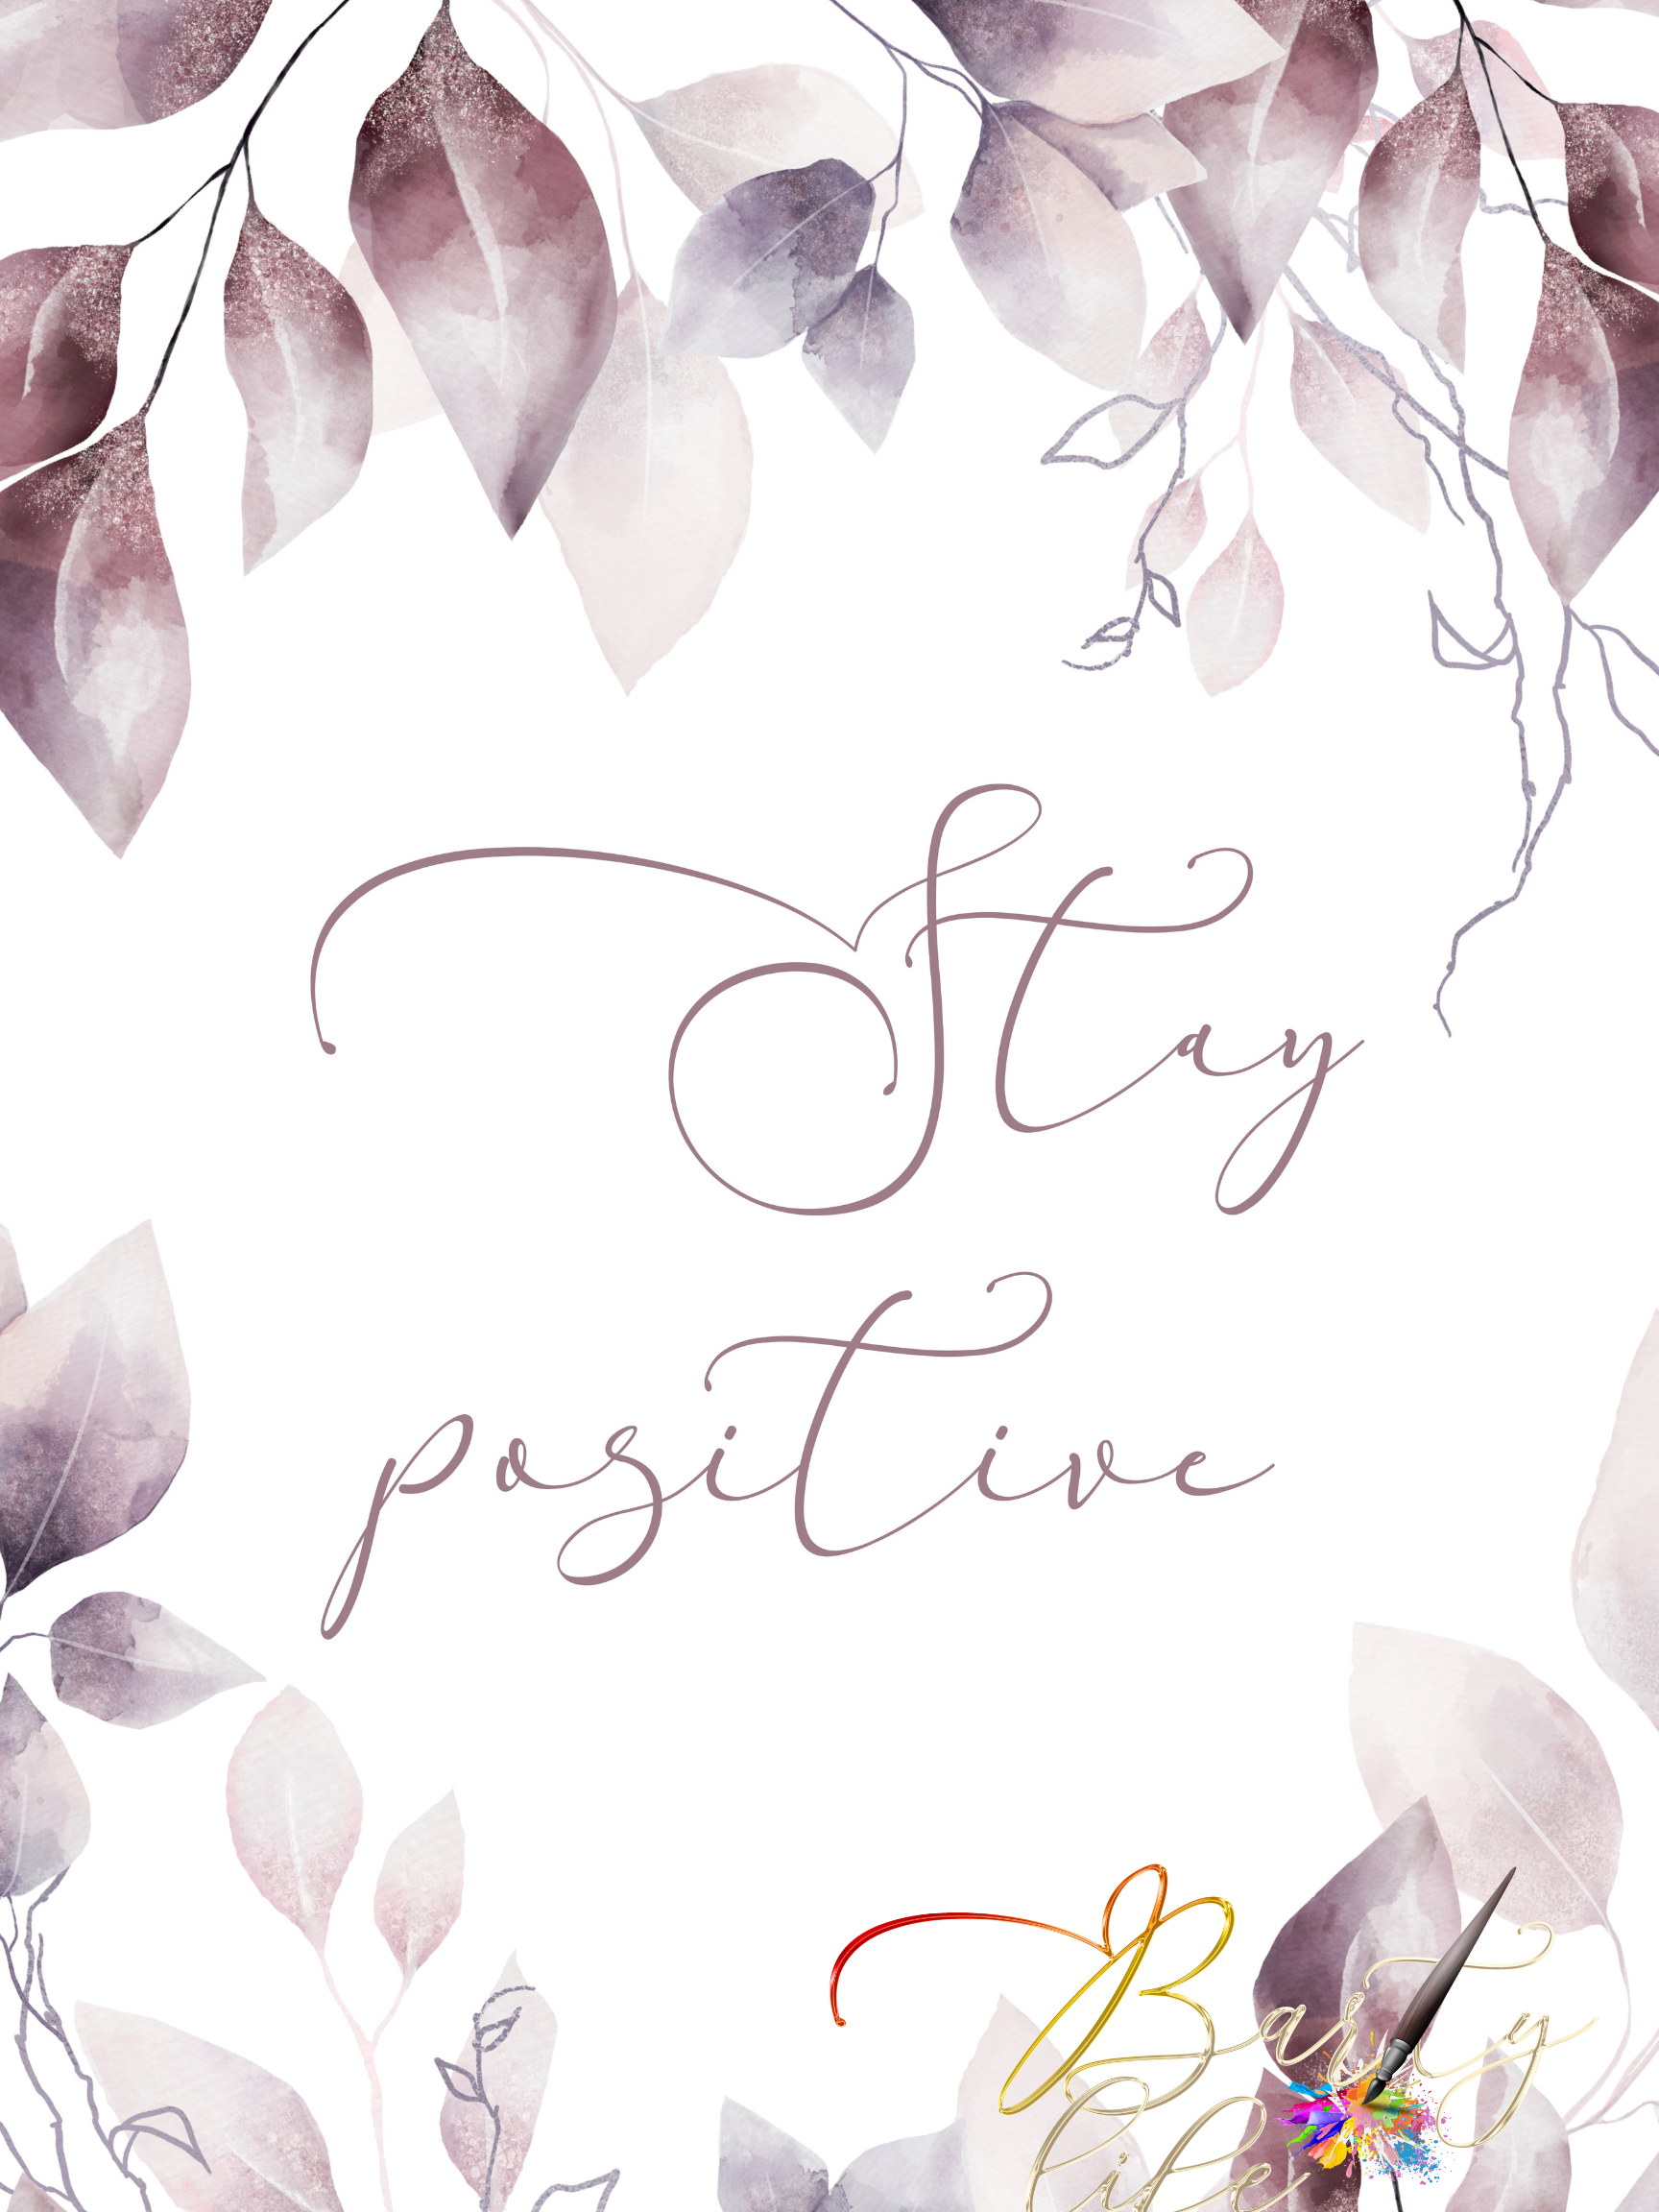 Stay Positive- Wall Art Barty life